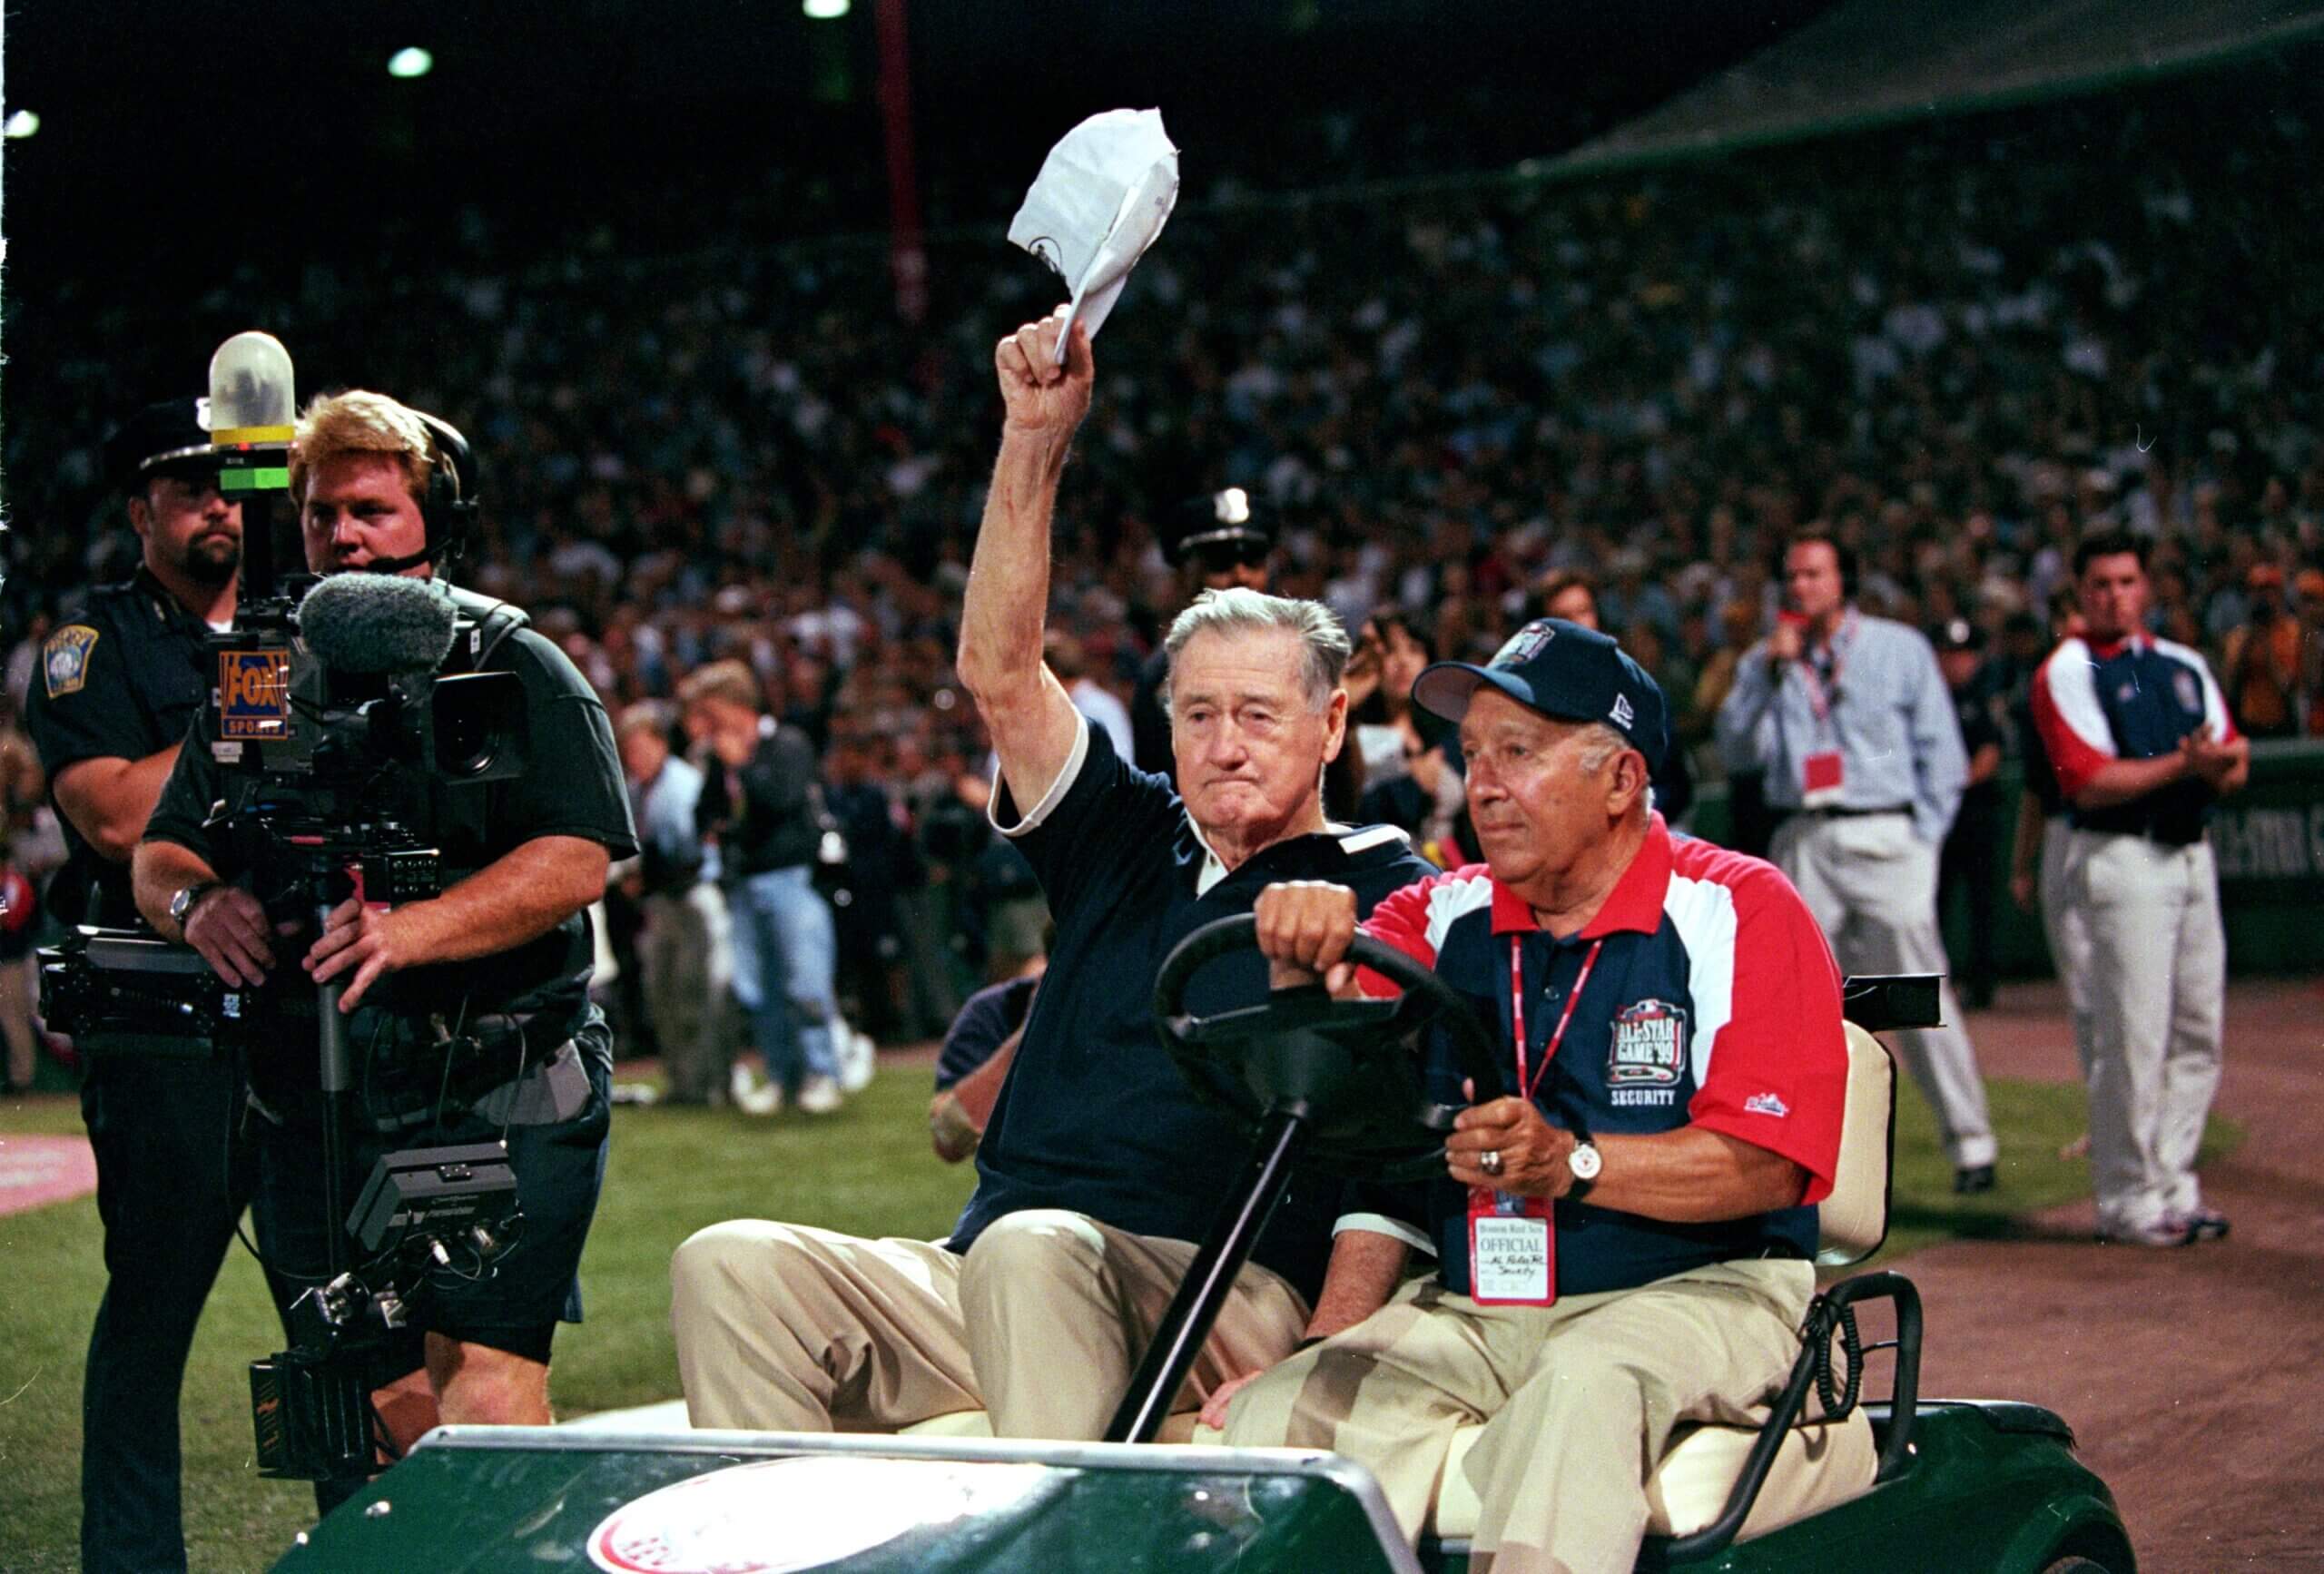 25 years ago, Ted Williams created an All-Star moment for the ages